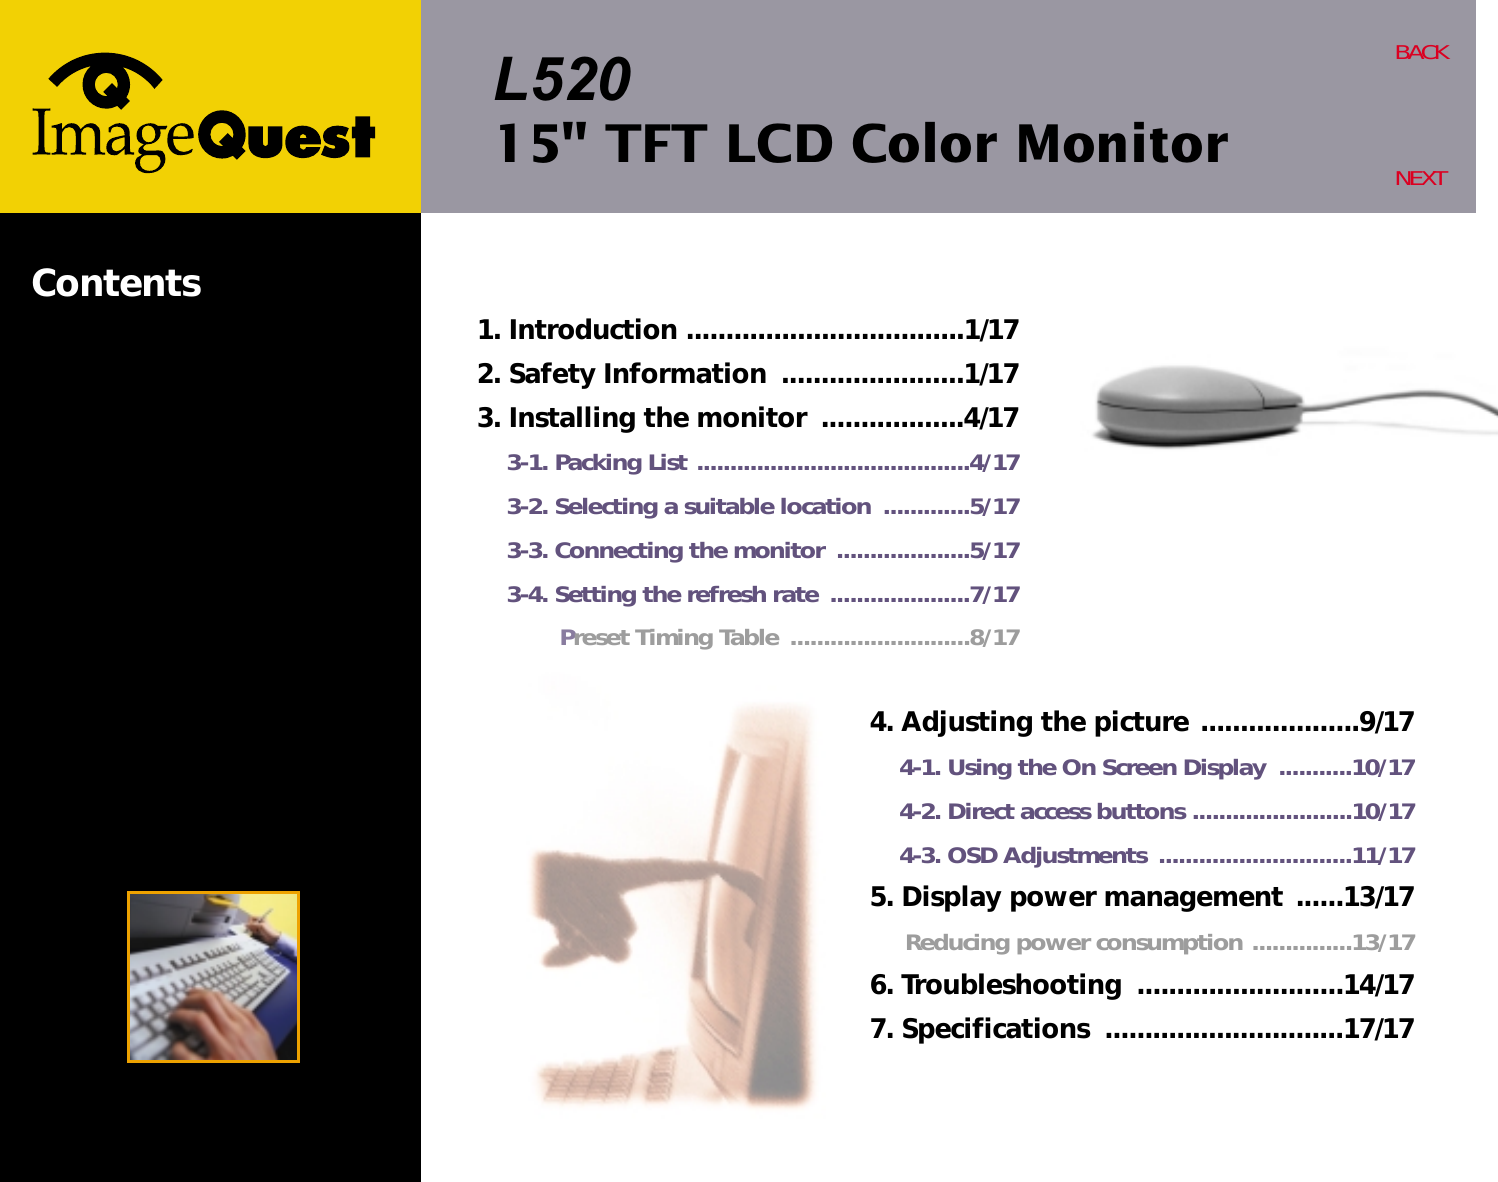 L52015&quot; TFT LCD Color MonitorBACKNEXTContents4. Adjusting the picture ....................9/174-1. Using the On Screen Display  ...........10/174-2. Direct access buttons ........................10/174-3. OSD Adjustments  .............................11/175. Display power management ......13/17Reducing power consumption ...............13/176. Troubleshooting  ..........................14/177. Specifications  ..............................17/171. Introduction ...................................1/172. Safety Information  .......................1/173. Installing the monitor  ..................4/173-1. Packing List .........................................4/173-2. Selecting a suitable location  .............5/173-3. Connecting the monitor  ....................5/173-4. Setting the refresh rate .....................7/17Preset Timing Table  ...........................8/17